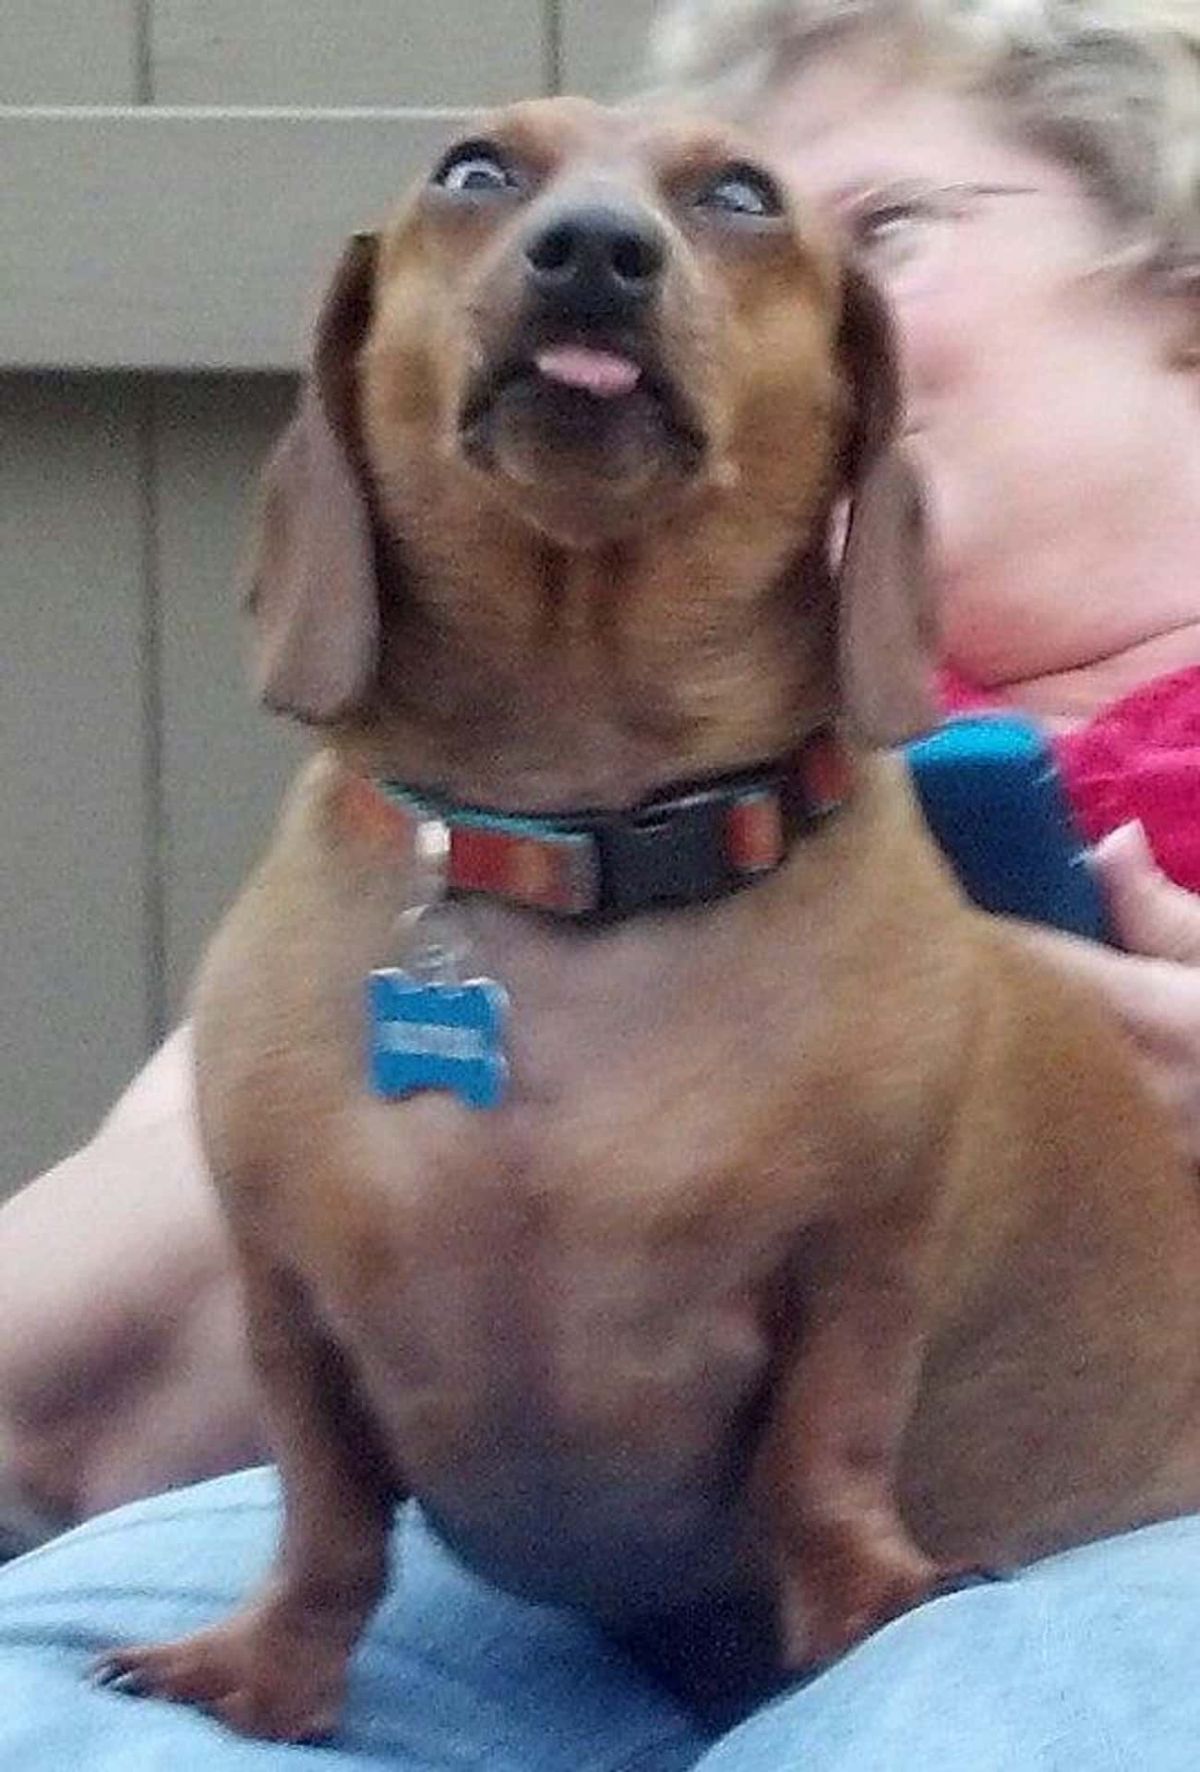 brown dachshund with tongue sticking out slightly being held by someone